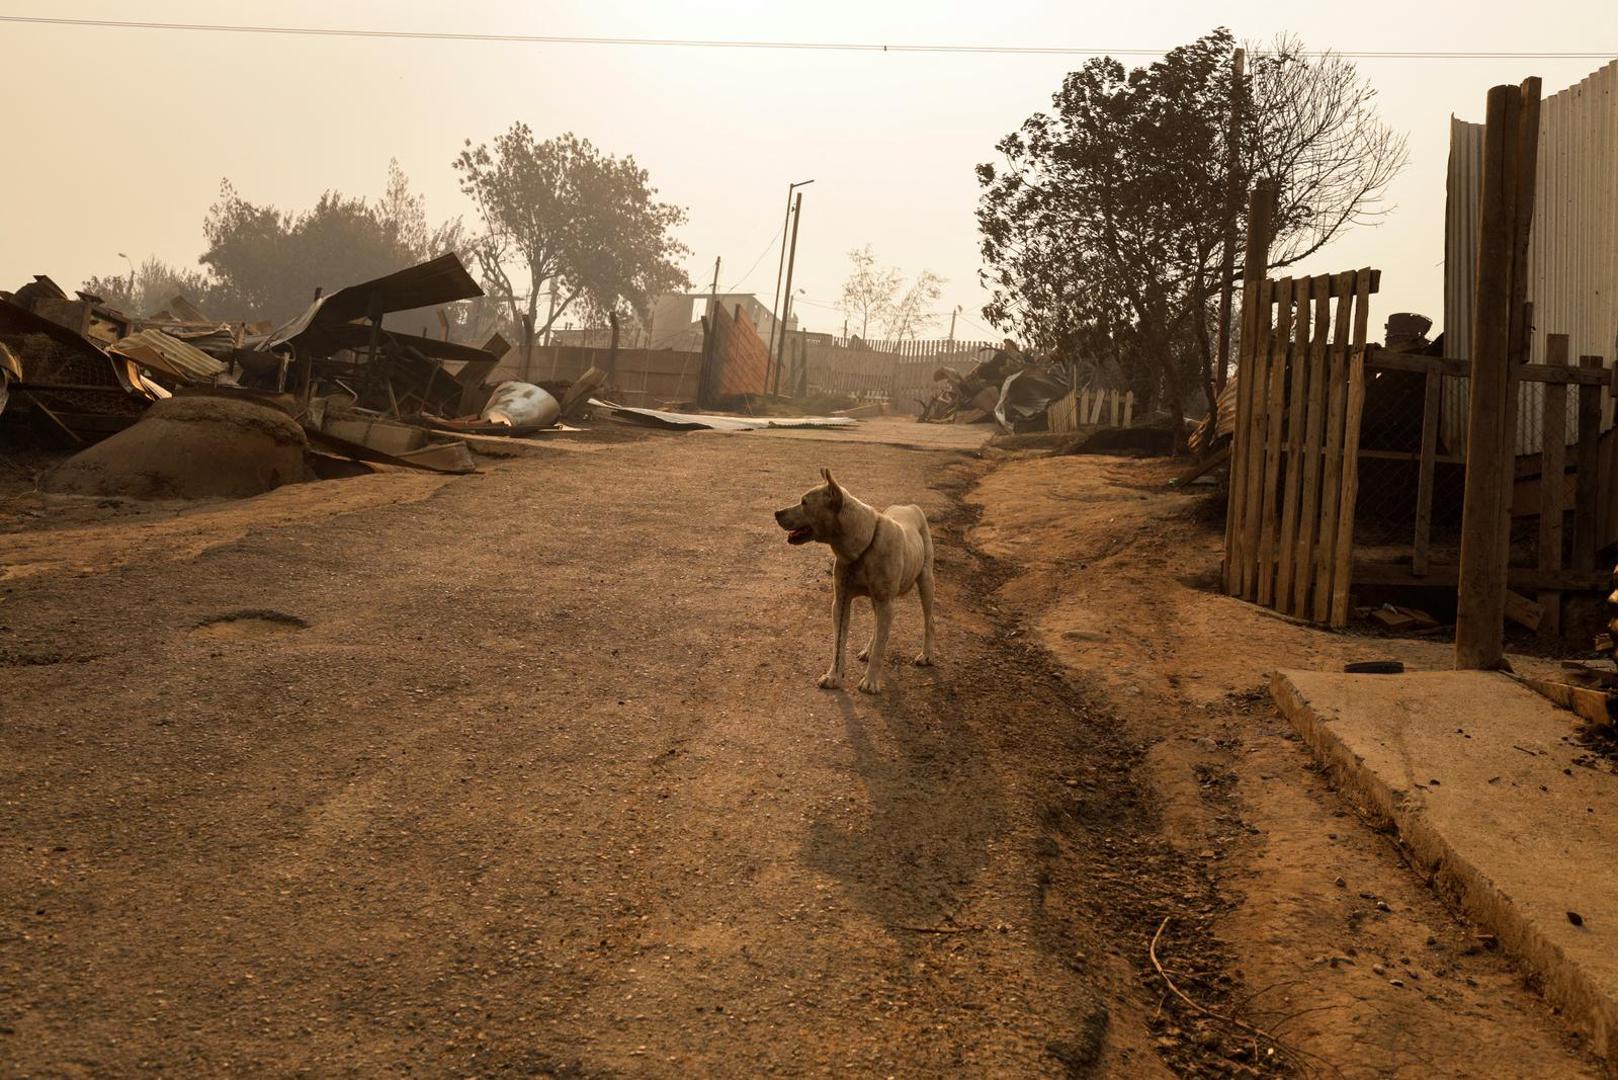 A dog stands near the remains of burnt houses following the spread of wildfires in Vina del Mar, Chile February 3, 2024. REUTERS/Sofia Yanjari Photo: SOFIA YANJARI/REUTERS